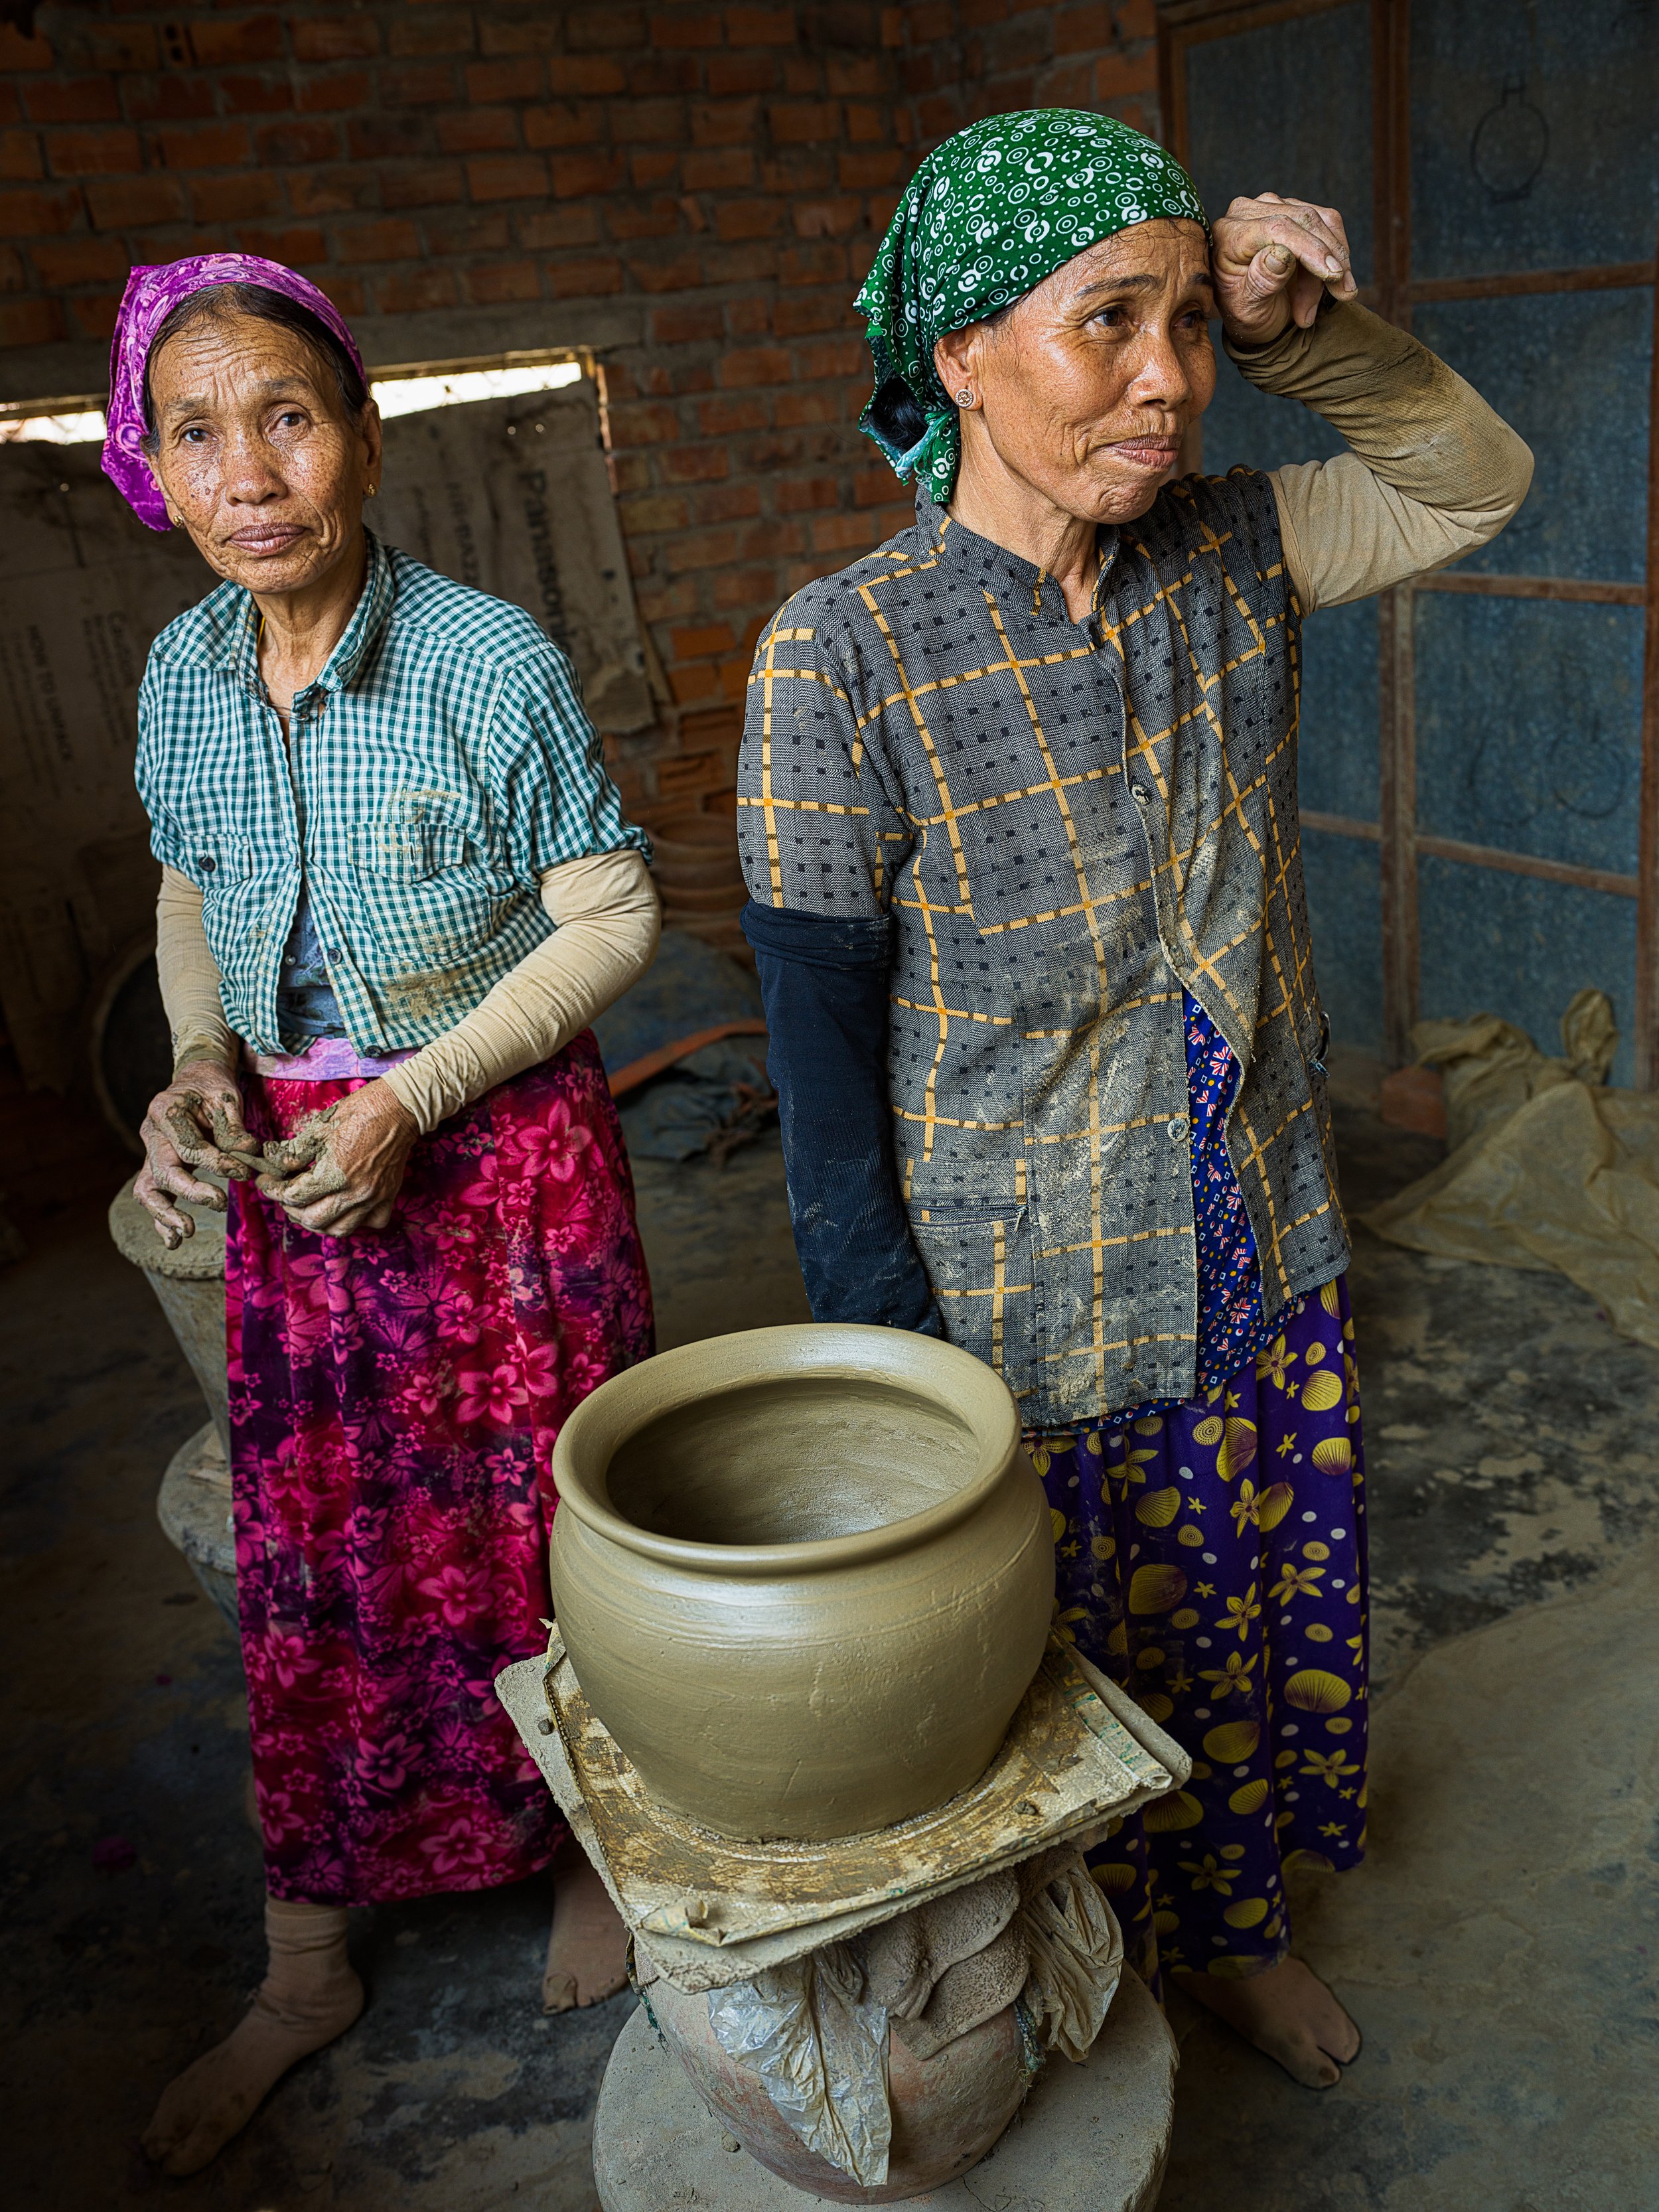  two cham lady potters in a village in ninh thuan province, vietnam 